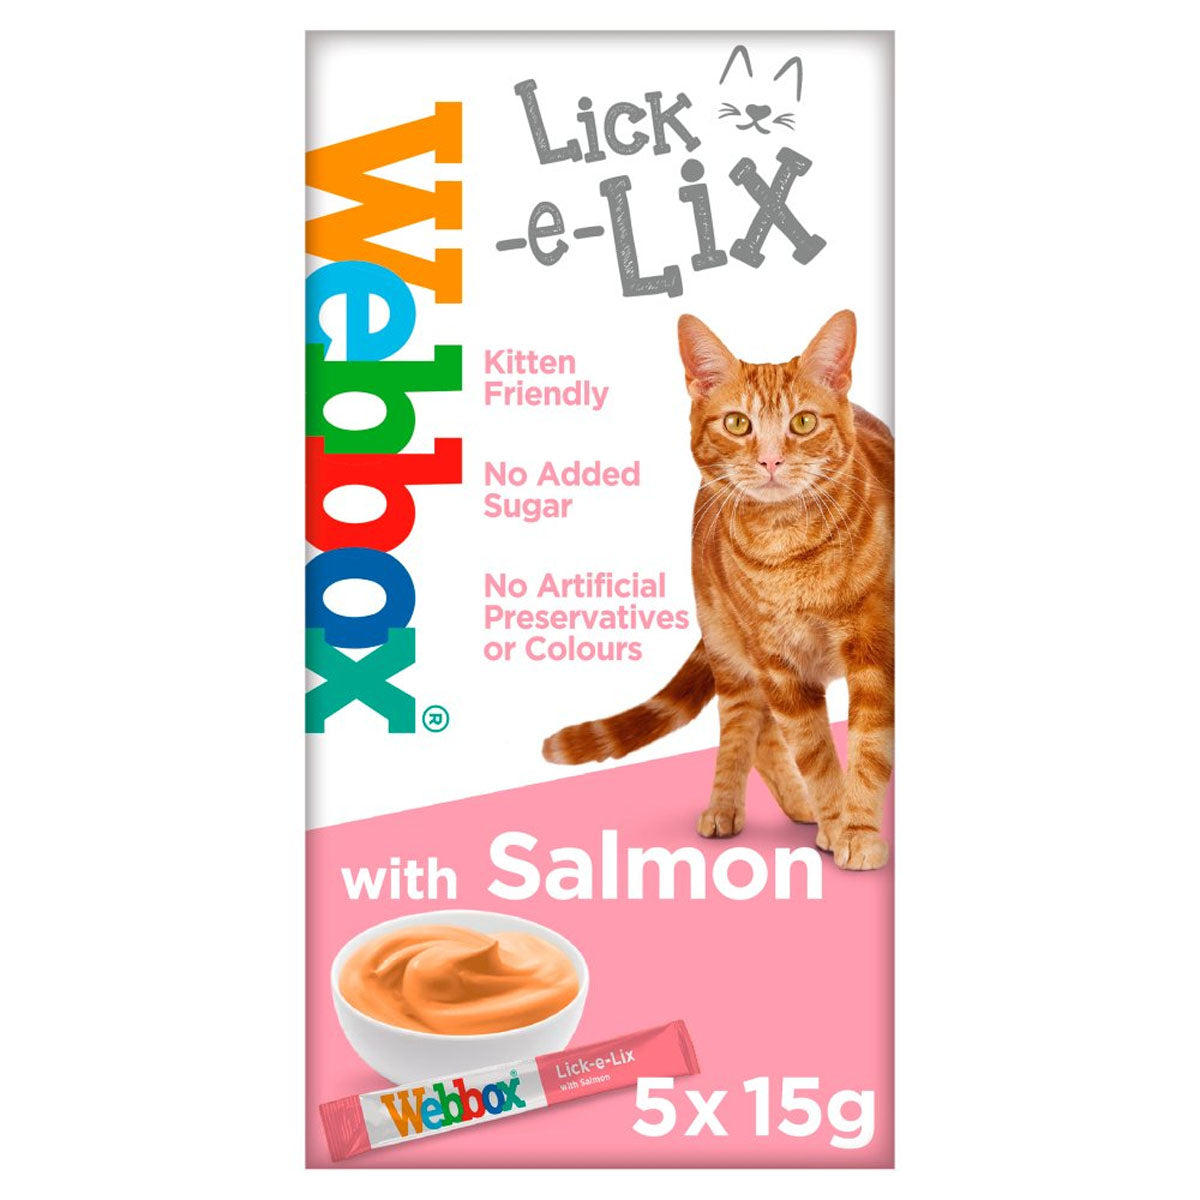 Webbox - 5 Lick-e-Lix with Salmon Tasty Yoghurty Treat - 15g - Continental Food Store